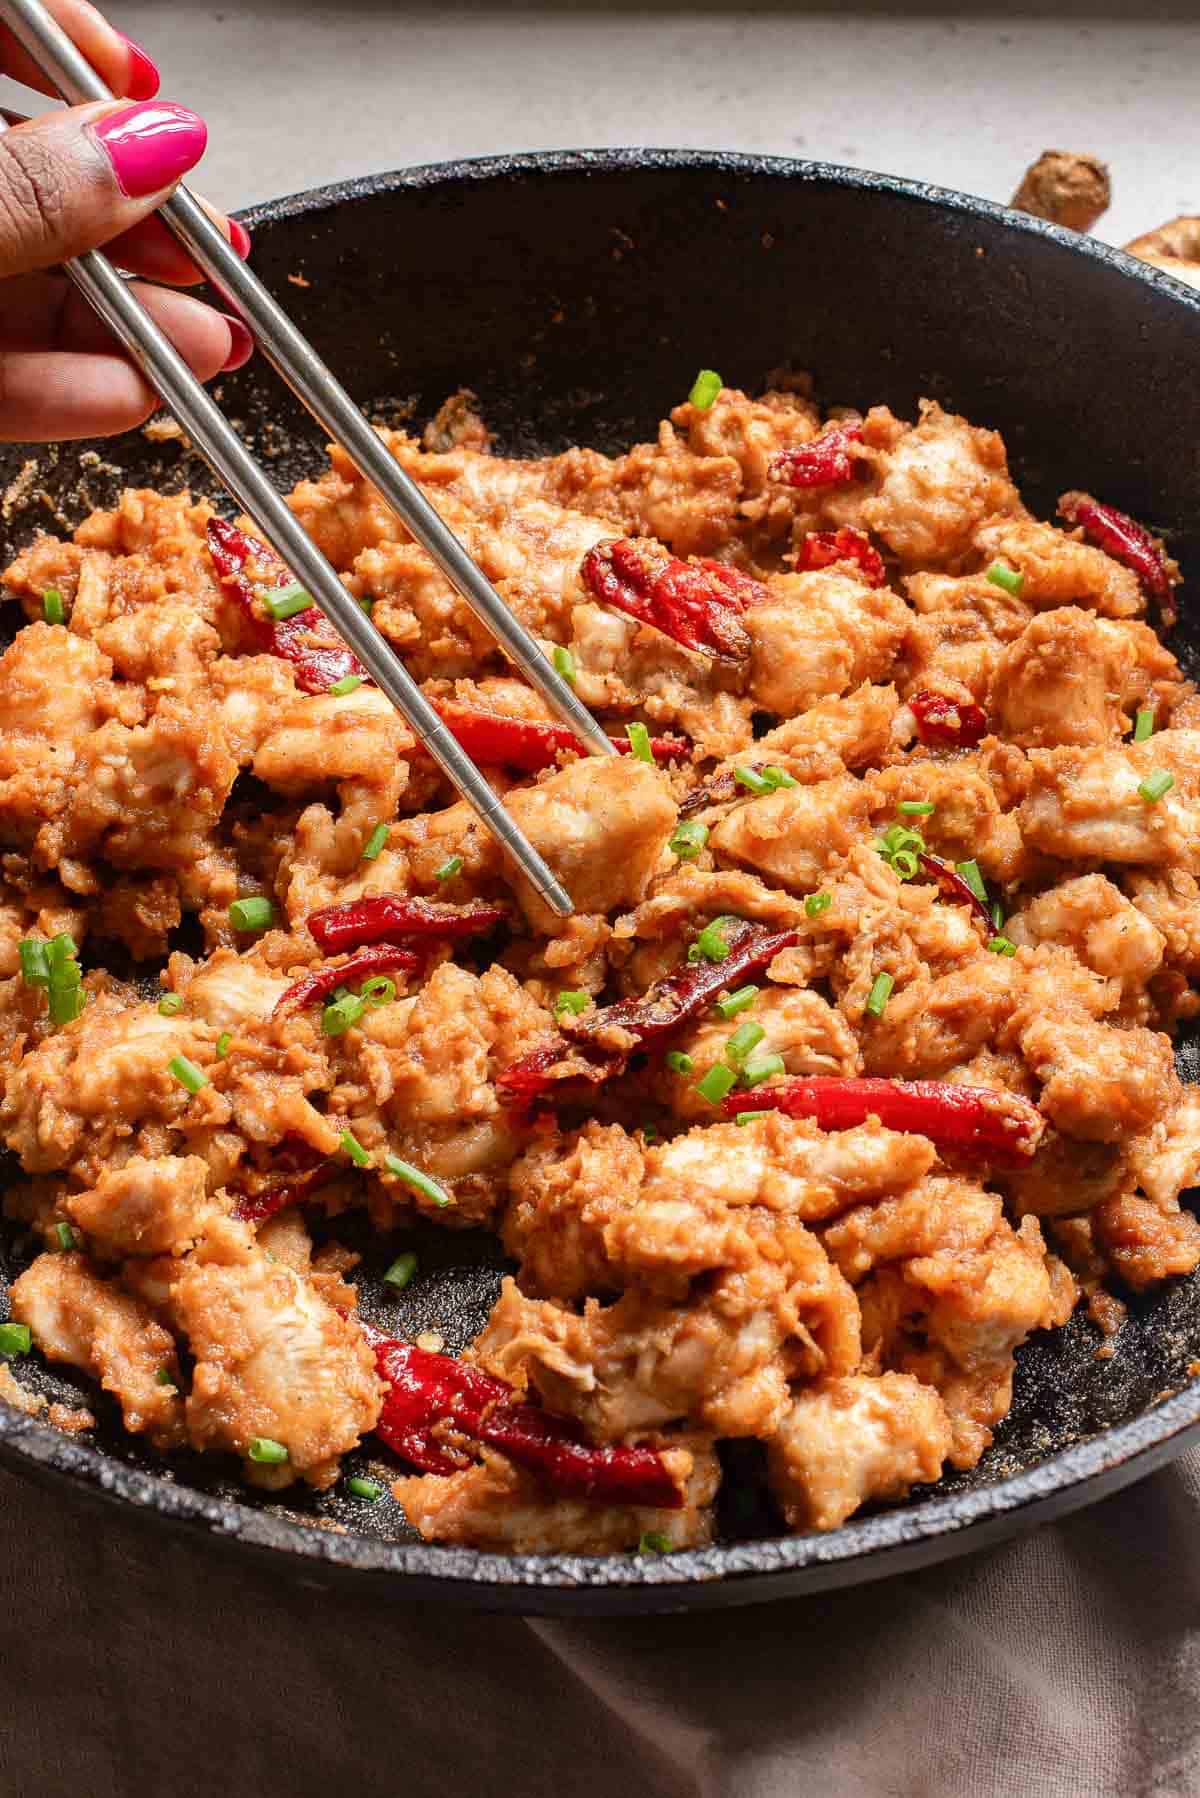 Stir-frying chicken with red peppers in a black skillet using metal tongs.